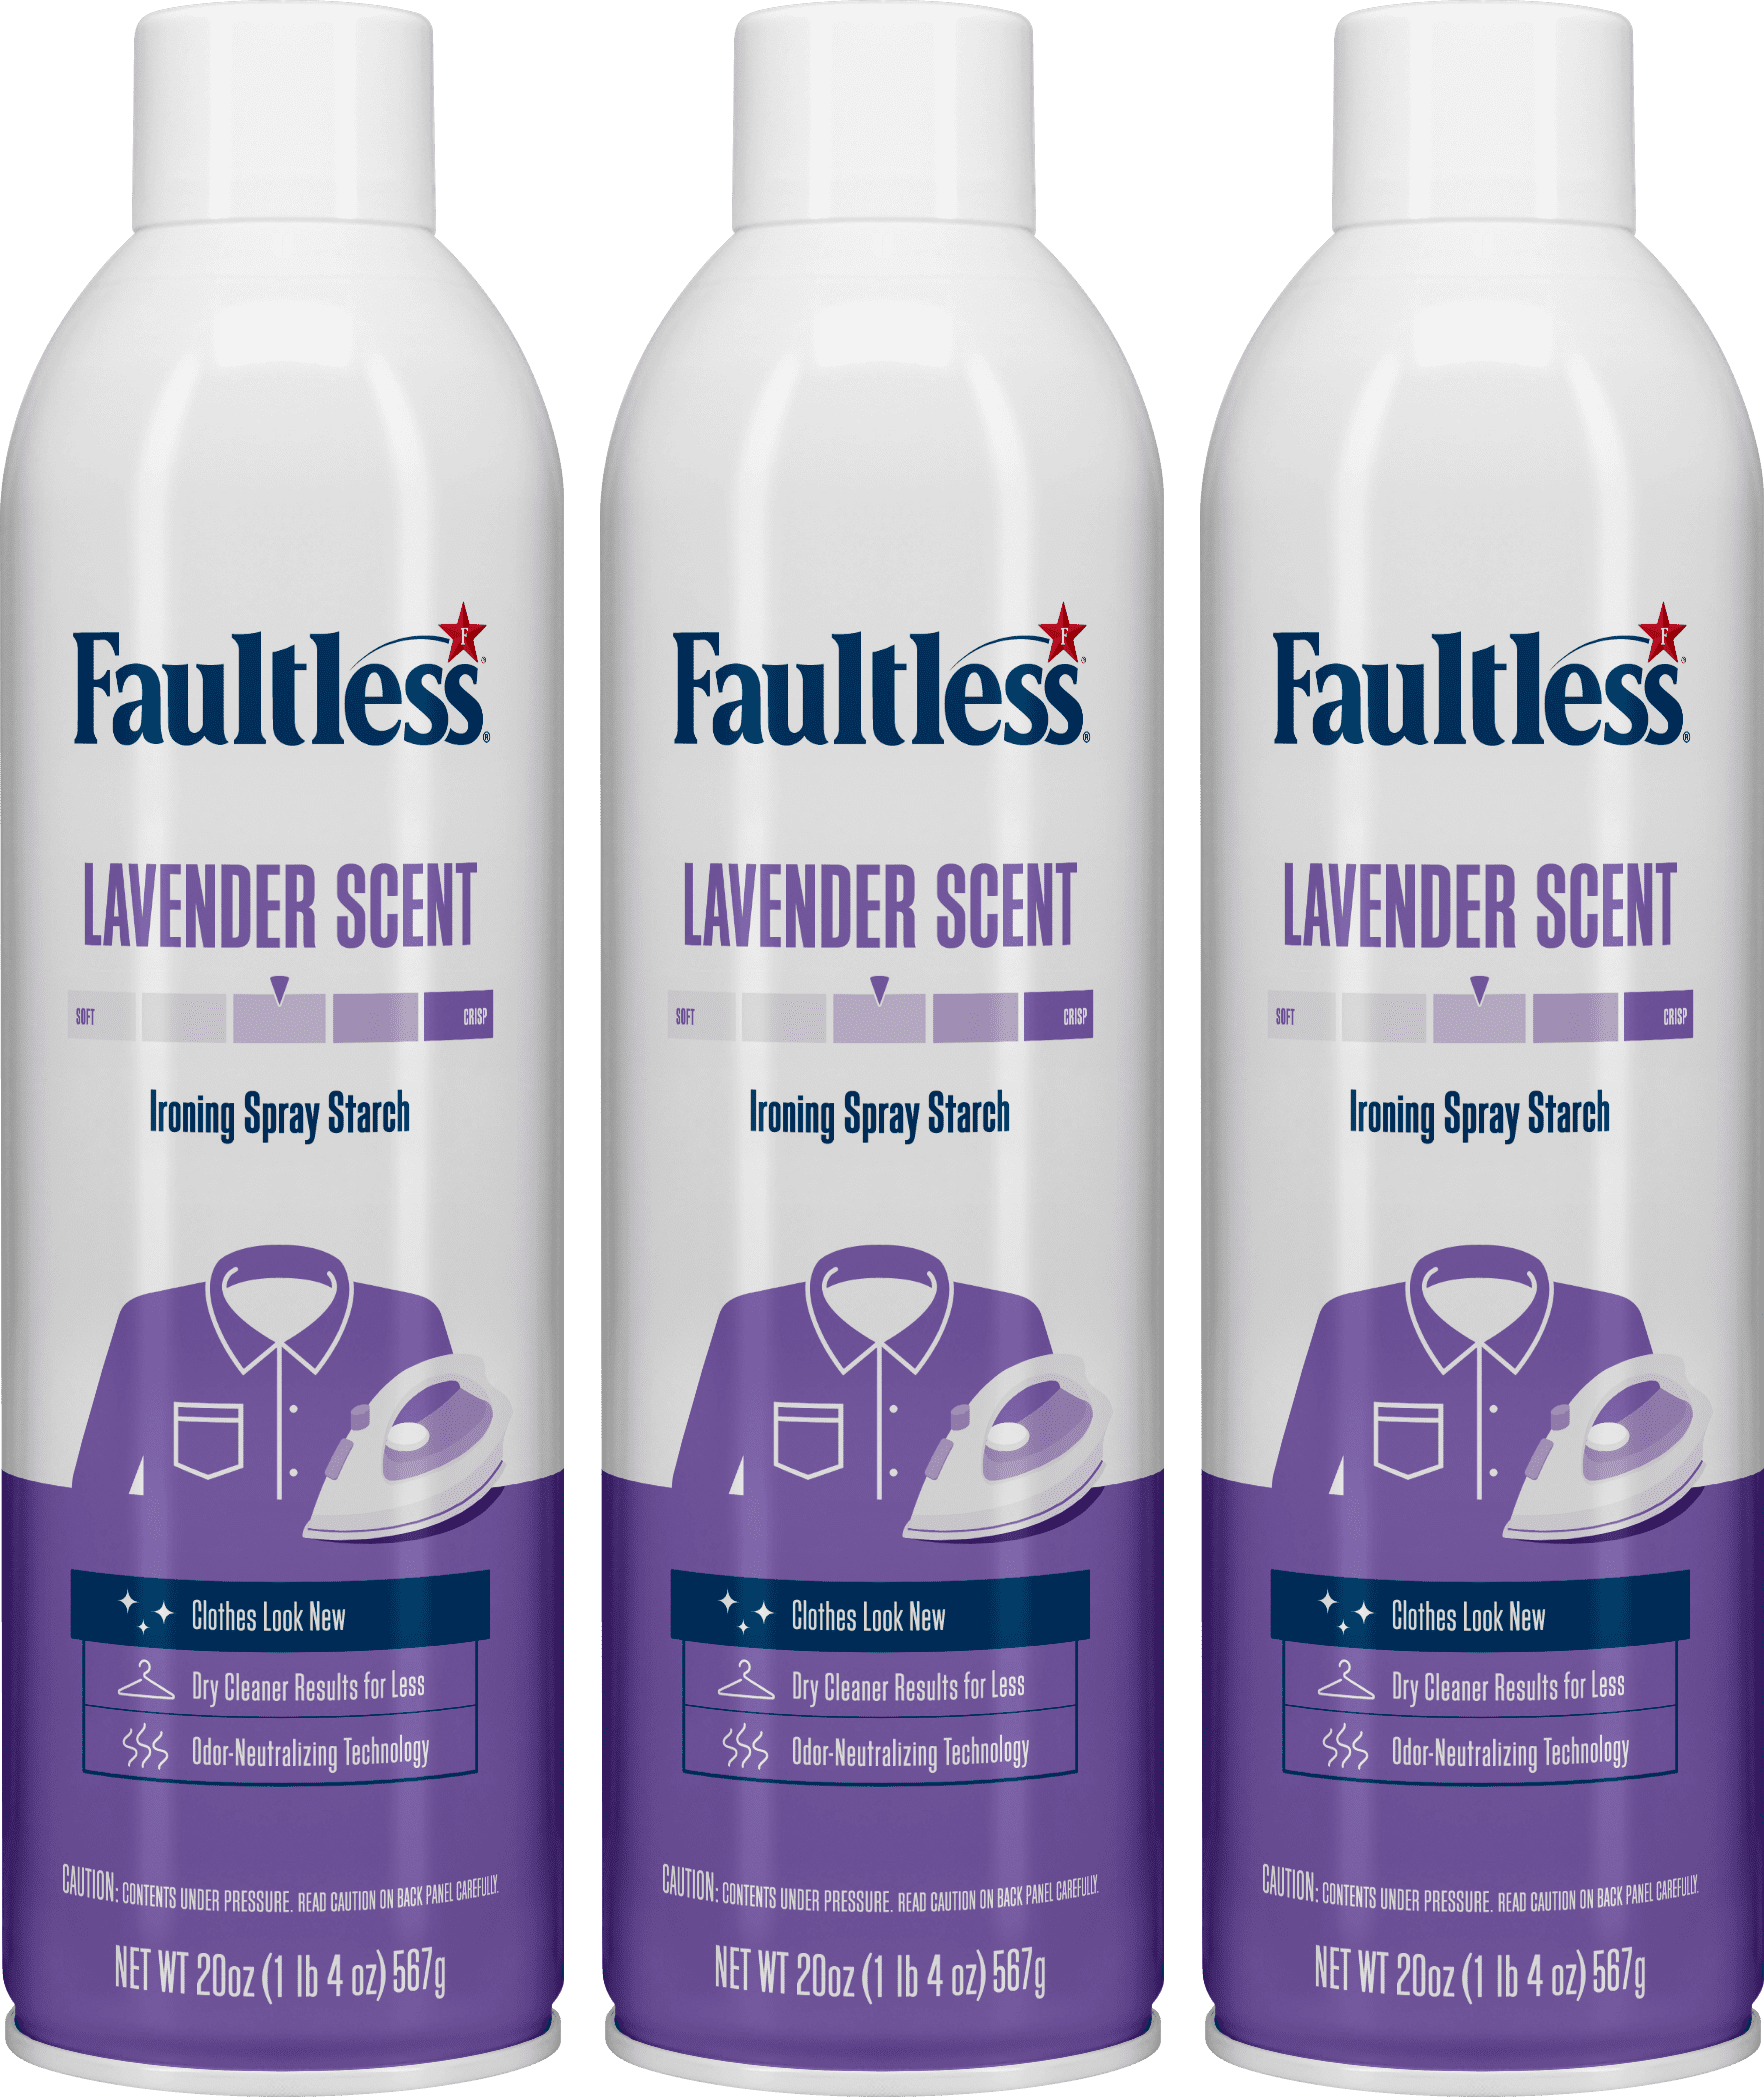 Faultless Fresh Scent Heavy Starch Spray 20 oz - Ace Hardware